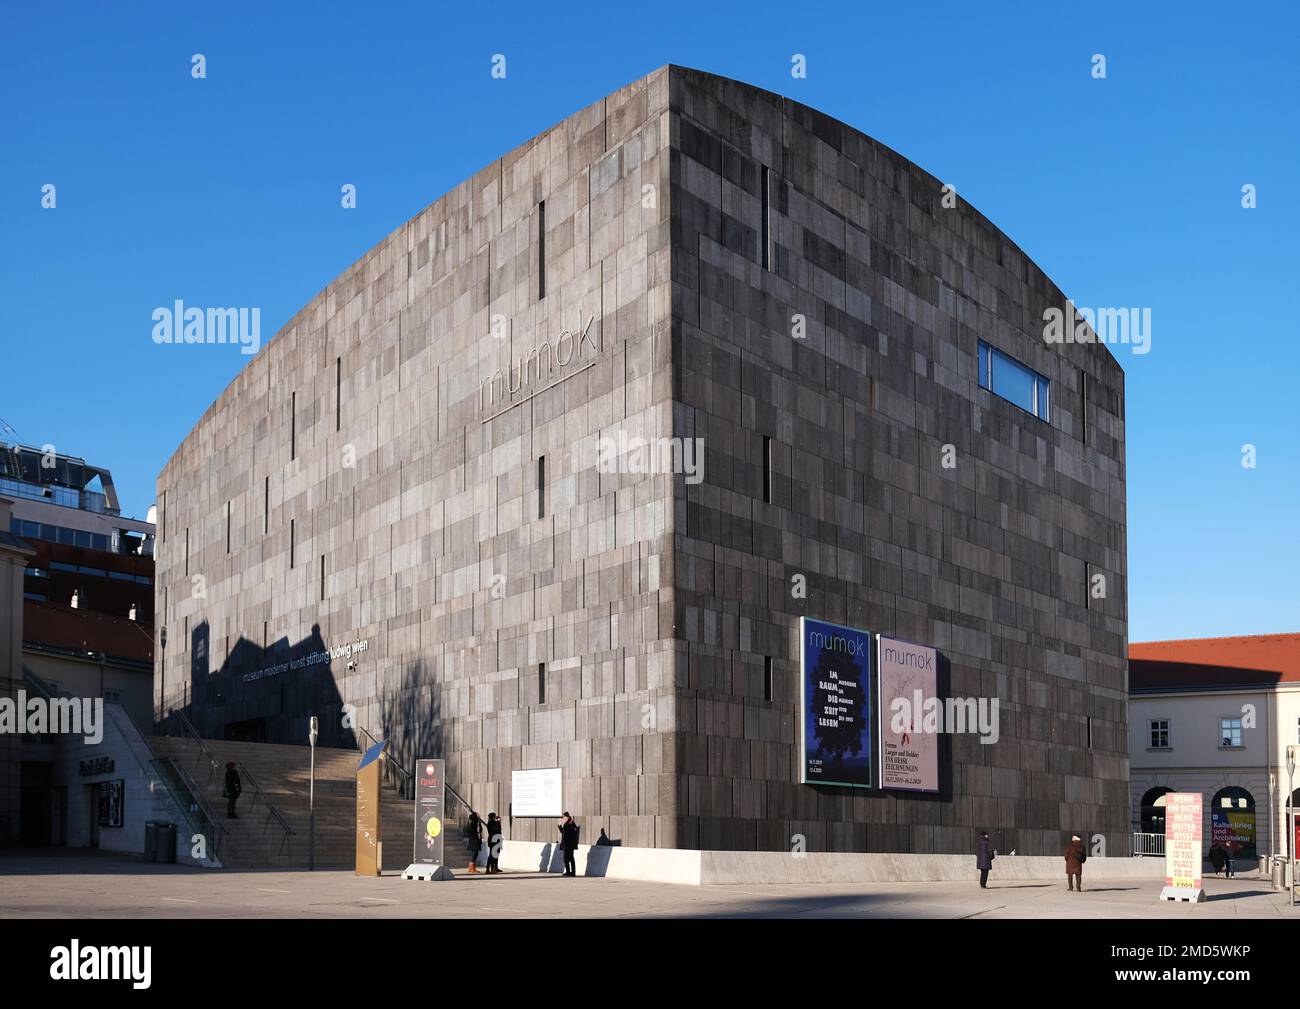 Vienna, Austria, Dec. 2019: A view of Mumok, the Museum of modern art in the Museumsquartier in Vienna Stock Photo